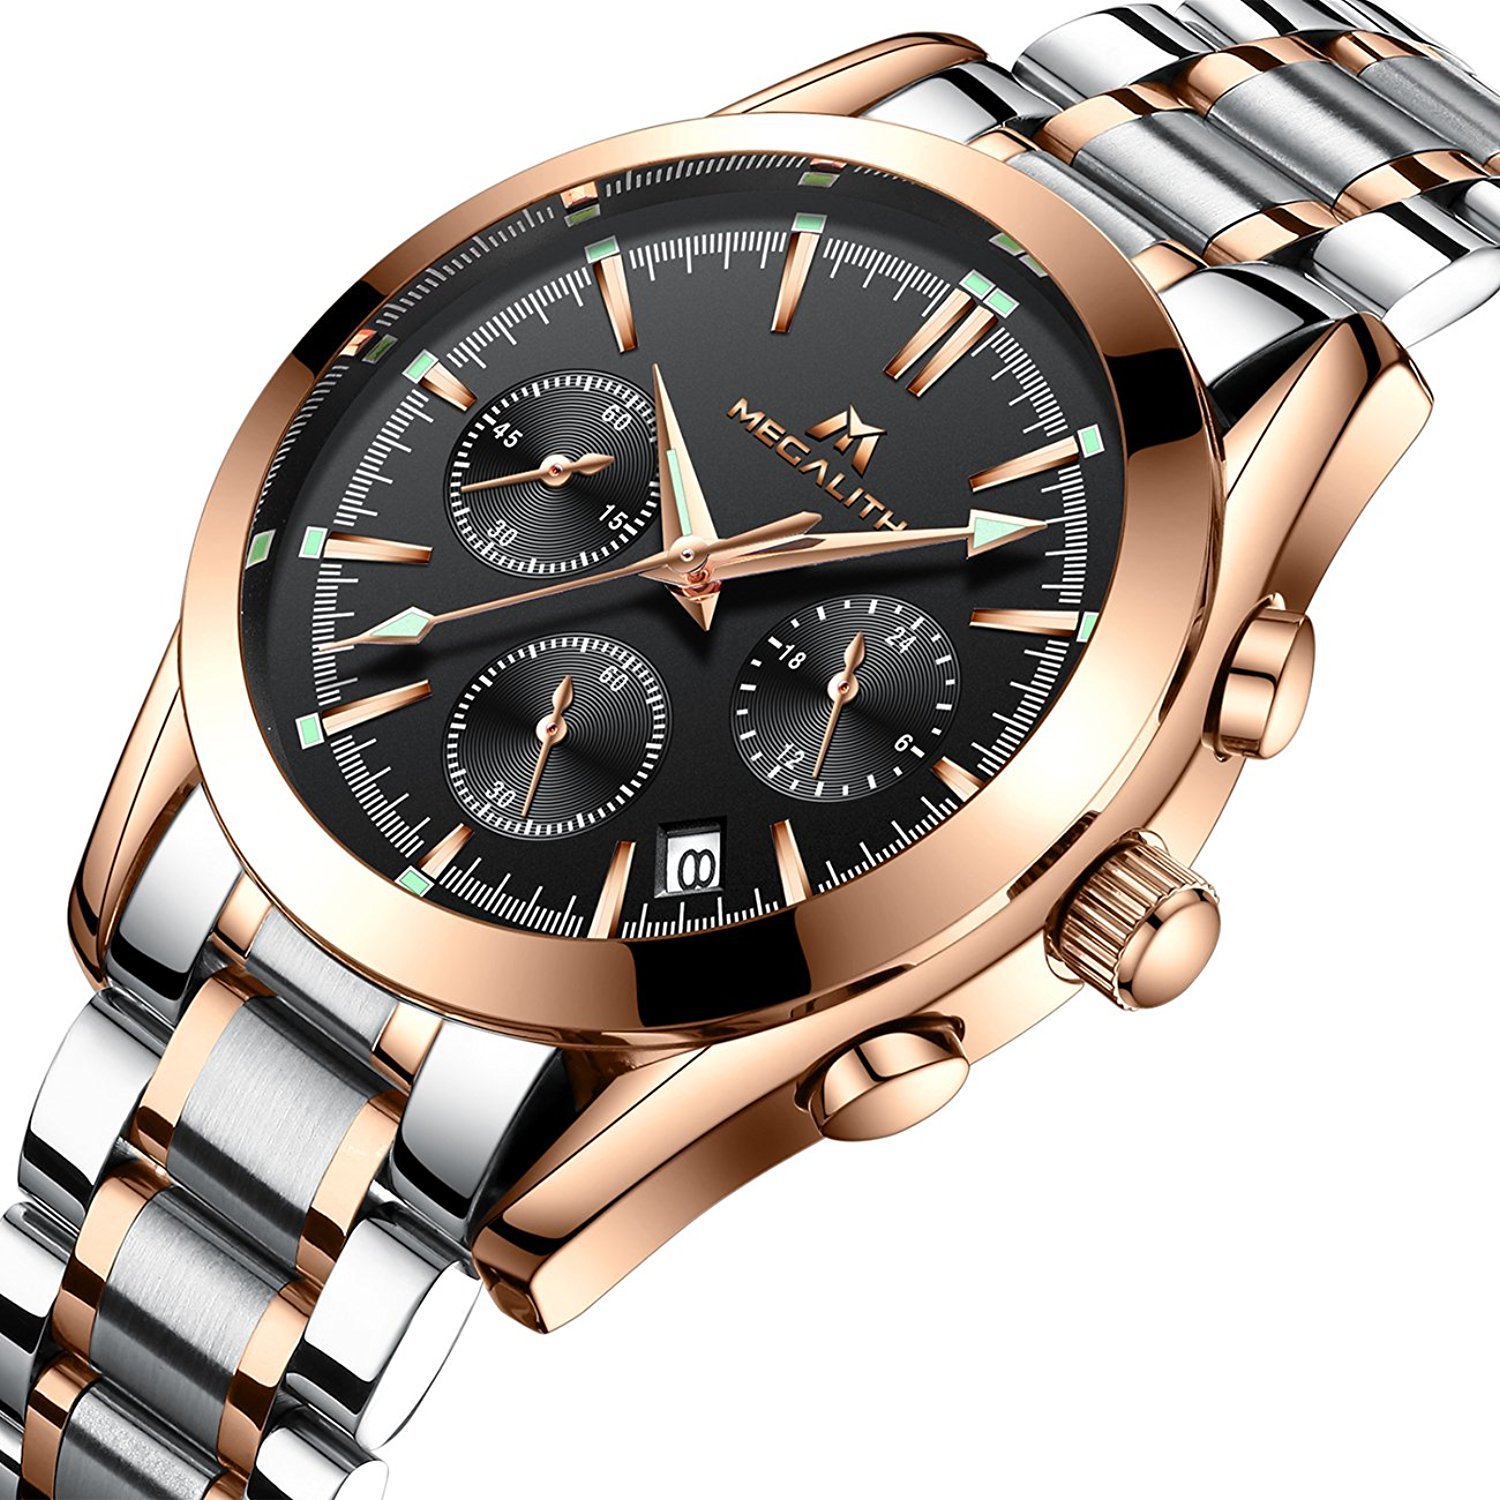 3029 Mens Stainless Steel Chronograph Watches Men Waterproof Date ...